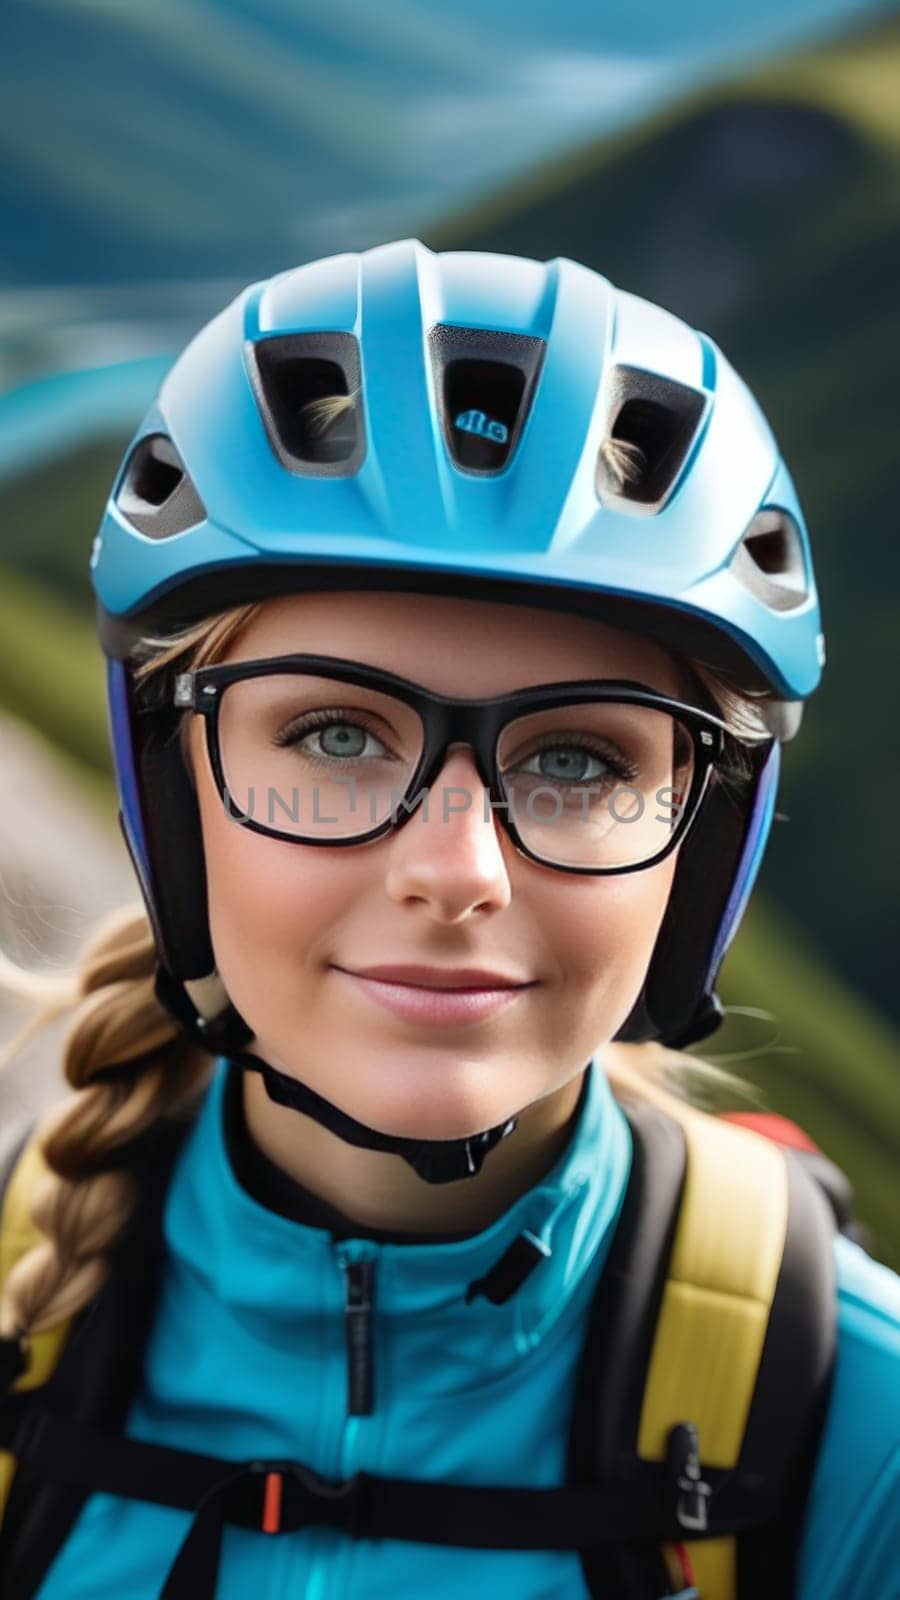 Woman wearing helmet and glasses stands confidently before towering mountain backdrop ready for adventure and exploration. She may be gearing up for bicycle ride or some other outdoor activity